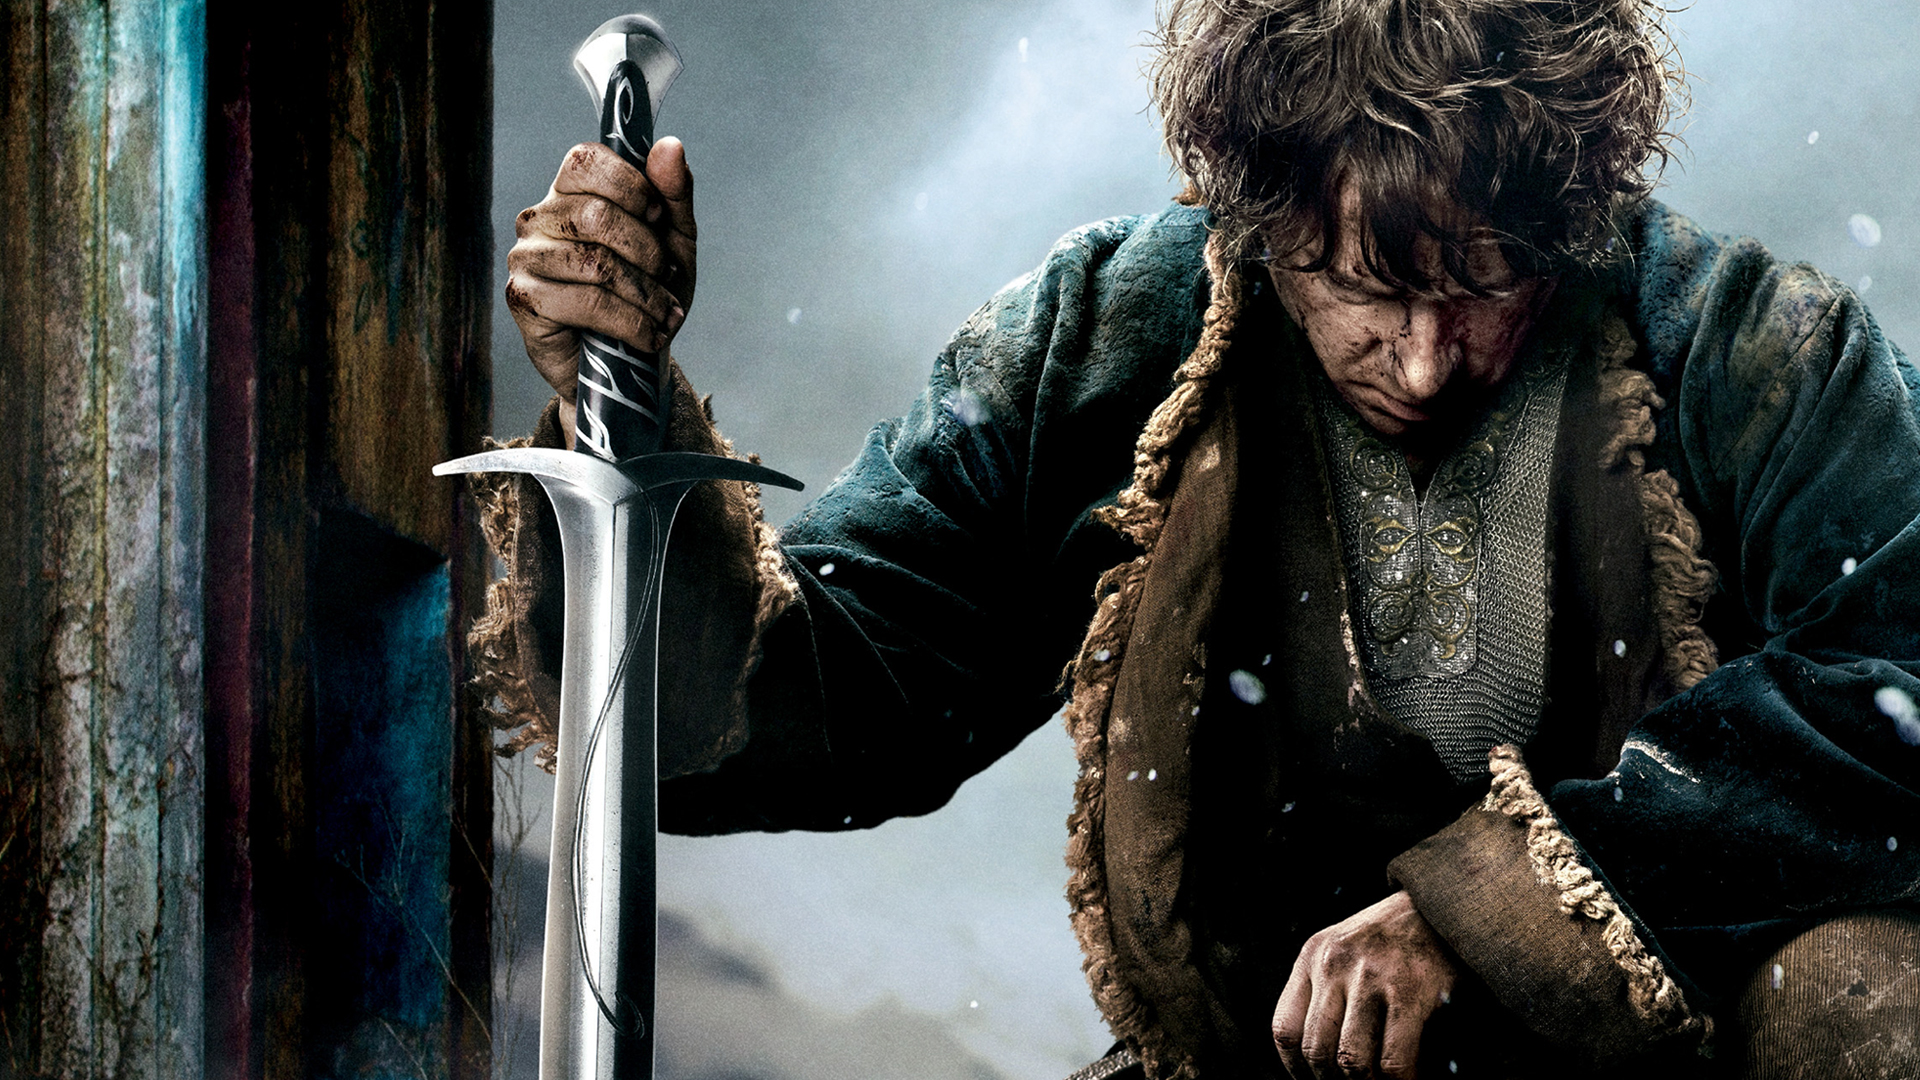 The Hobbit The Battle Of The Five Armies Wallpaper - Bilbo Baggins Battle Of Five Armies - HD Wallpaper 